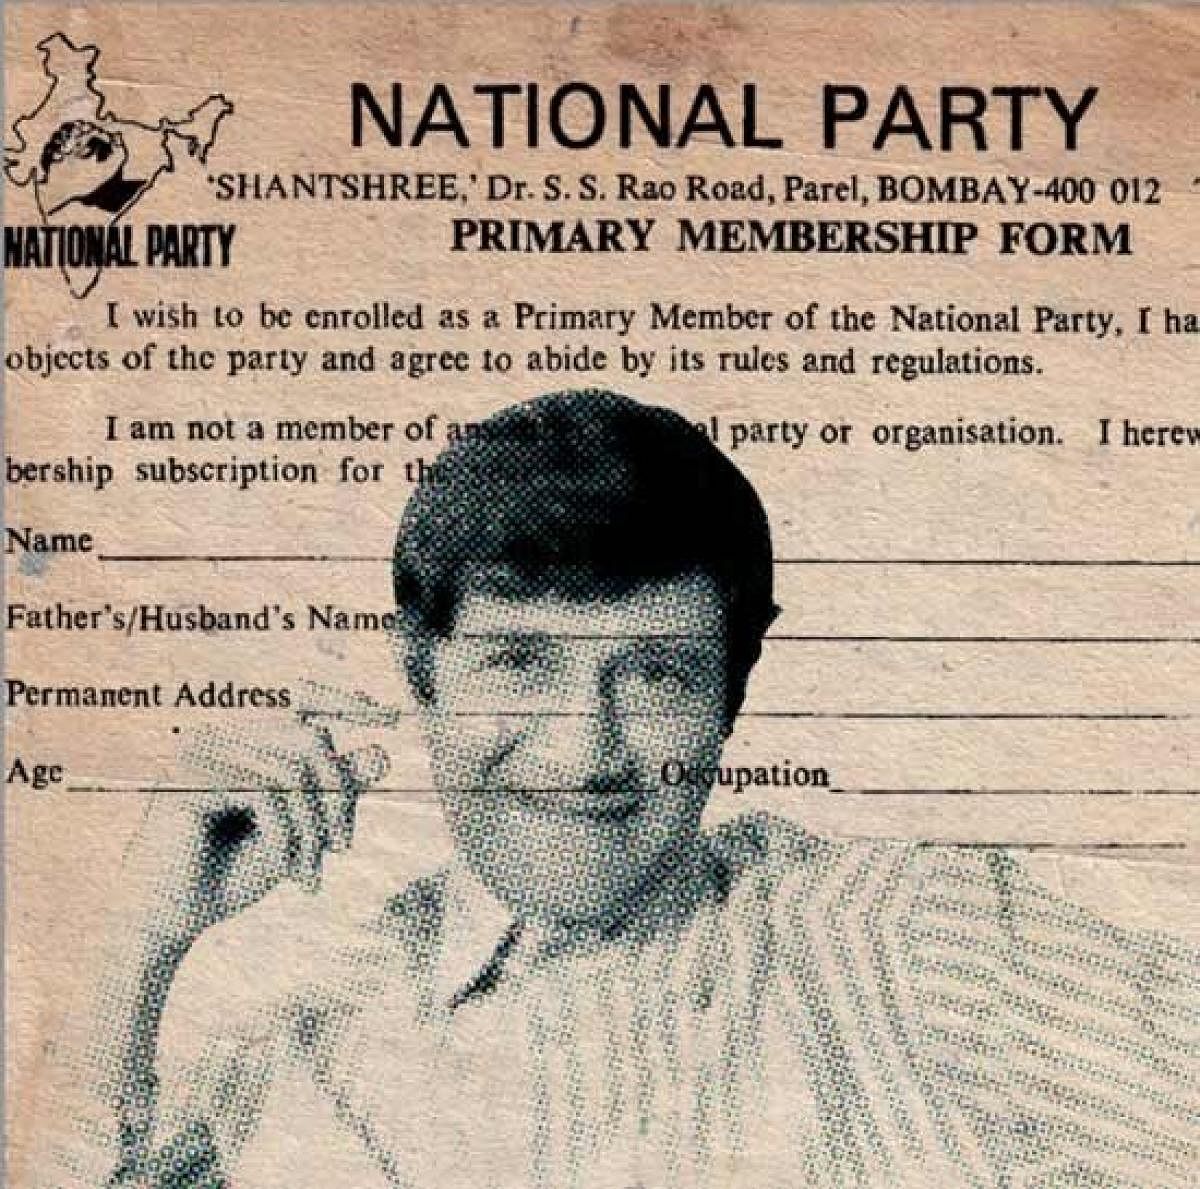 The membership form of Dev Anand's National Party of India.